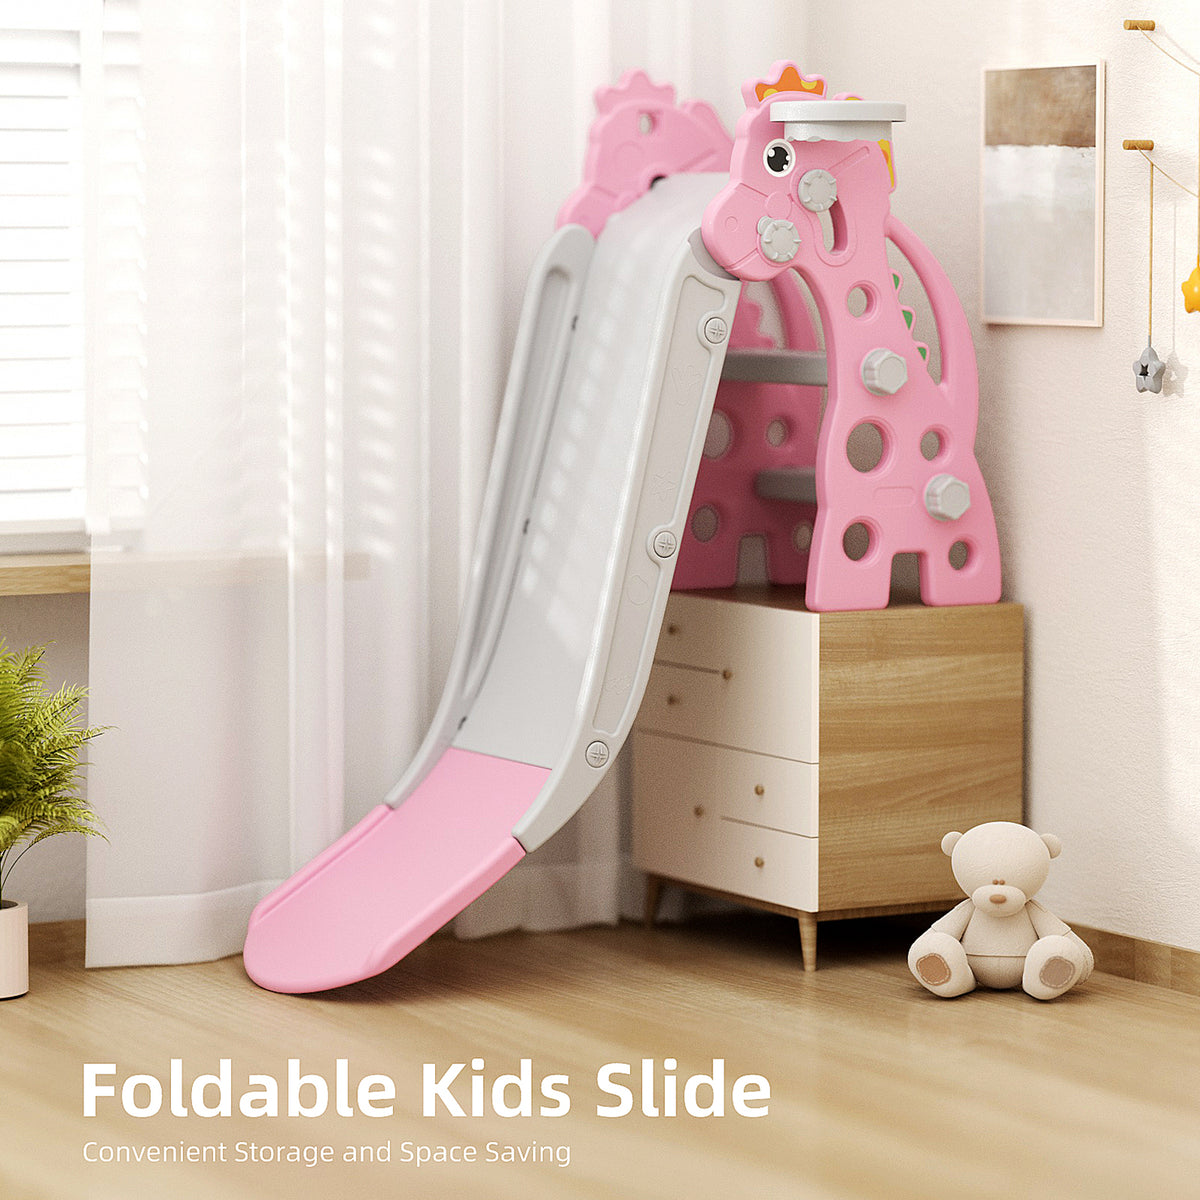 67i 3 in 1 Foldable Slide Set for Toddlers Age 1-3 Pink